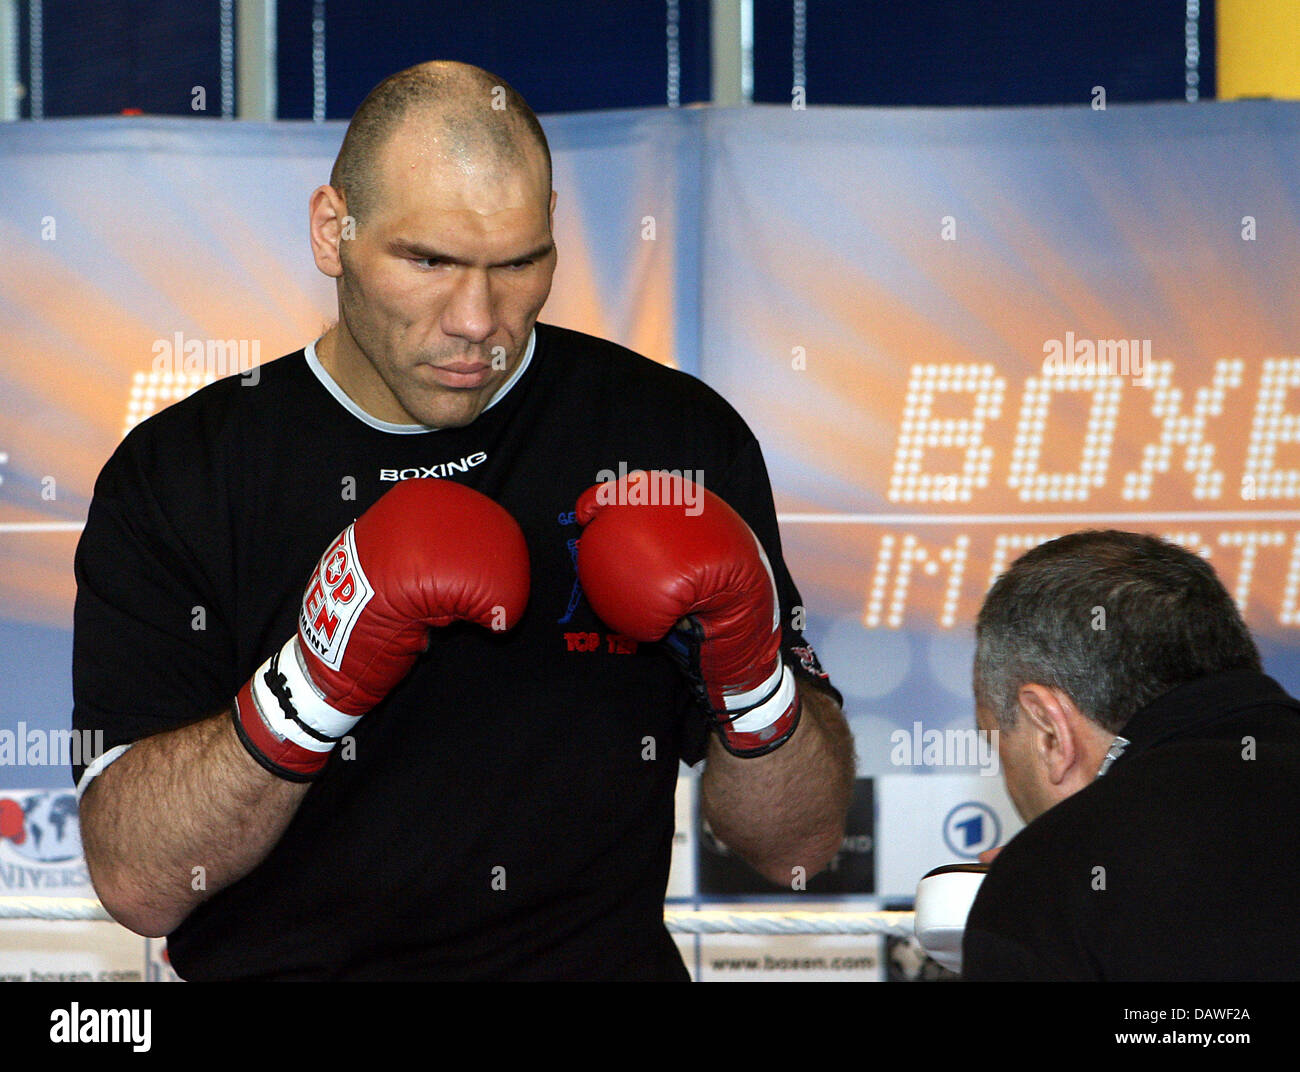 Russian heavyweight boxer Nikolai Valuev poses during a training for the press in Stuttgart, Germany, Tuesday, 10 April 2007. Current WBA heavyweight title holder Valuev is going to defend his title vs Uzbek challenger Ruslan Chagaev on 14 April. Photo: Norbert Foersterling Stock Photo